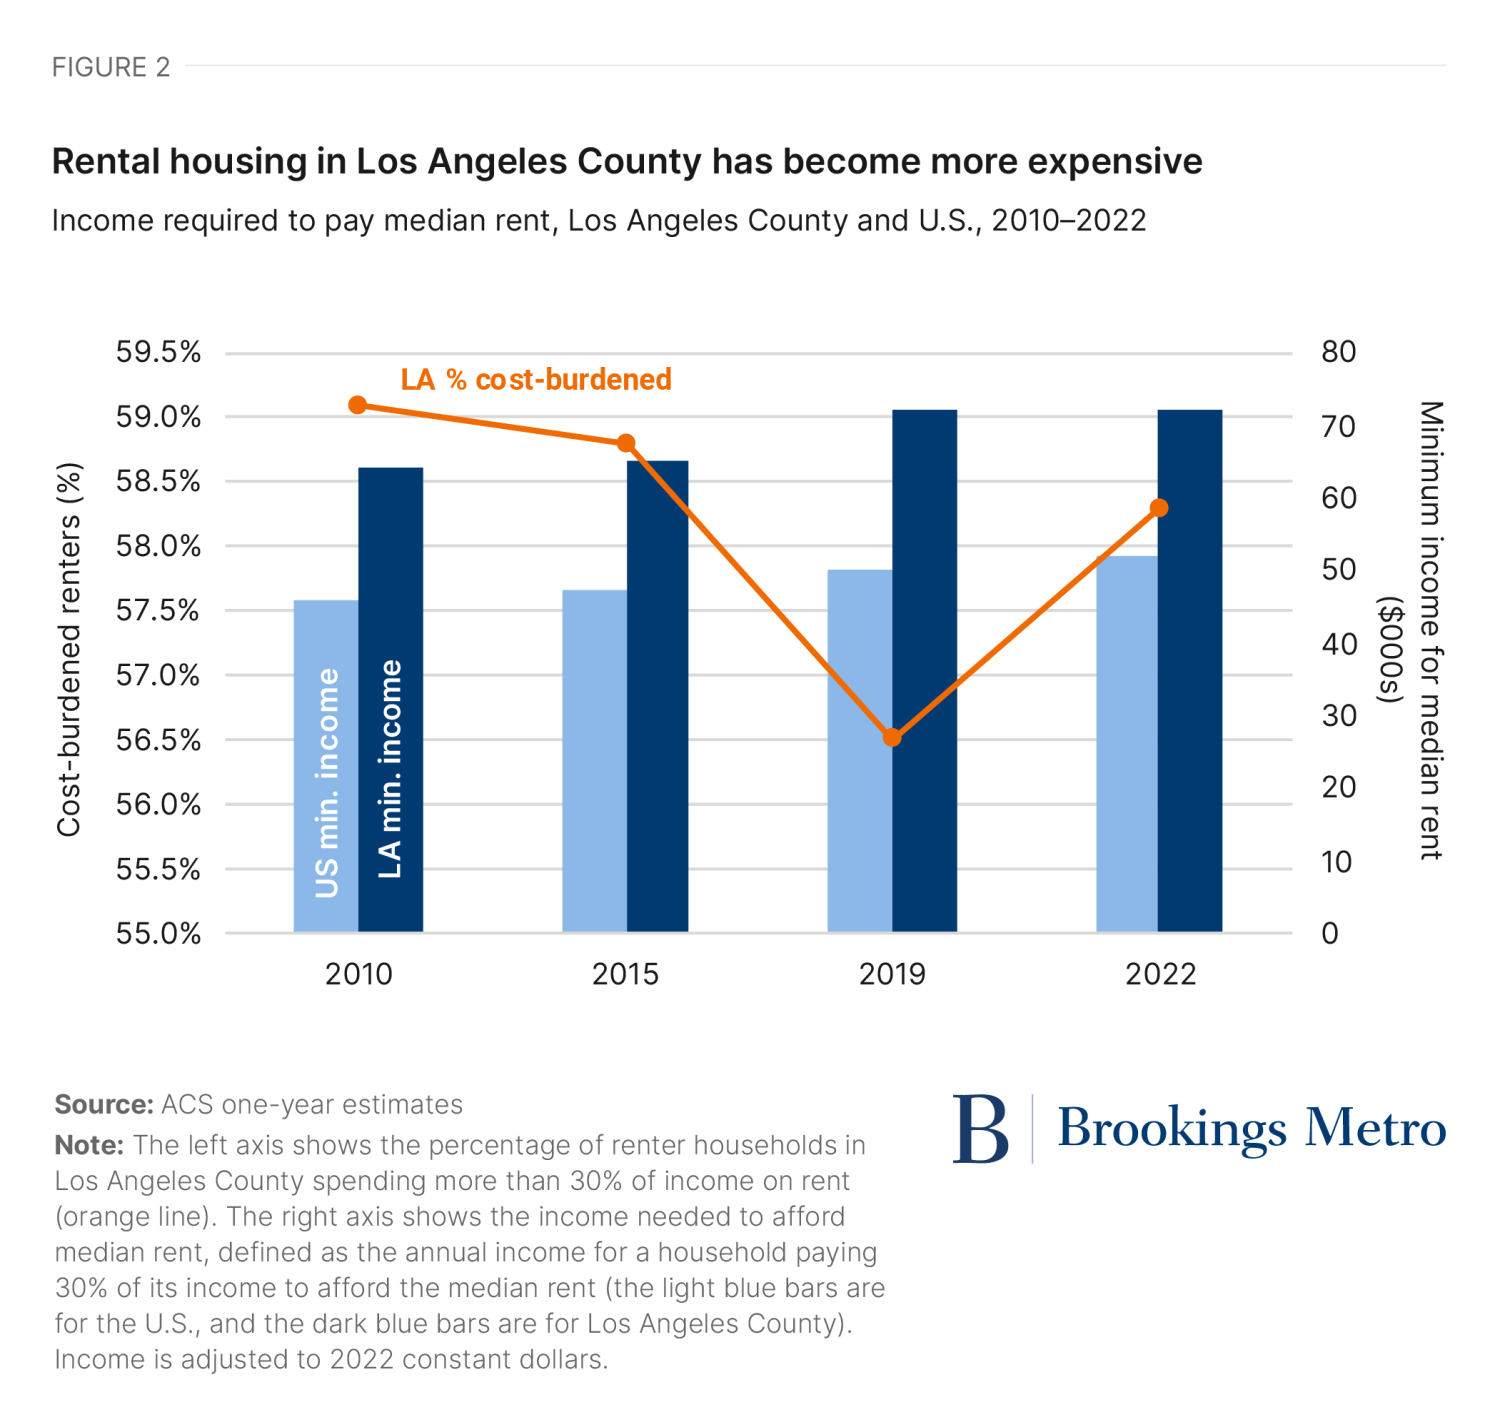 Figure 2: Rental housing in Los Angeles County has become more expensive